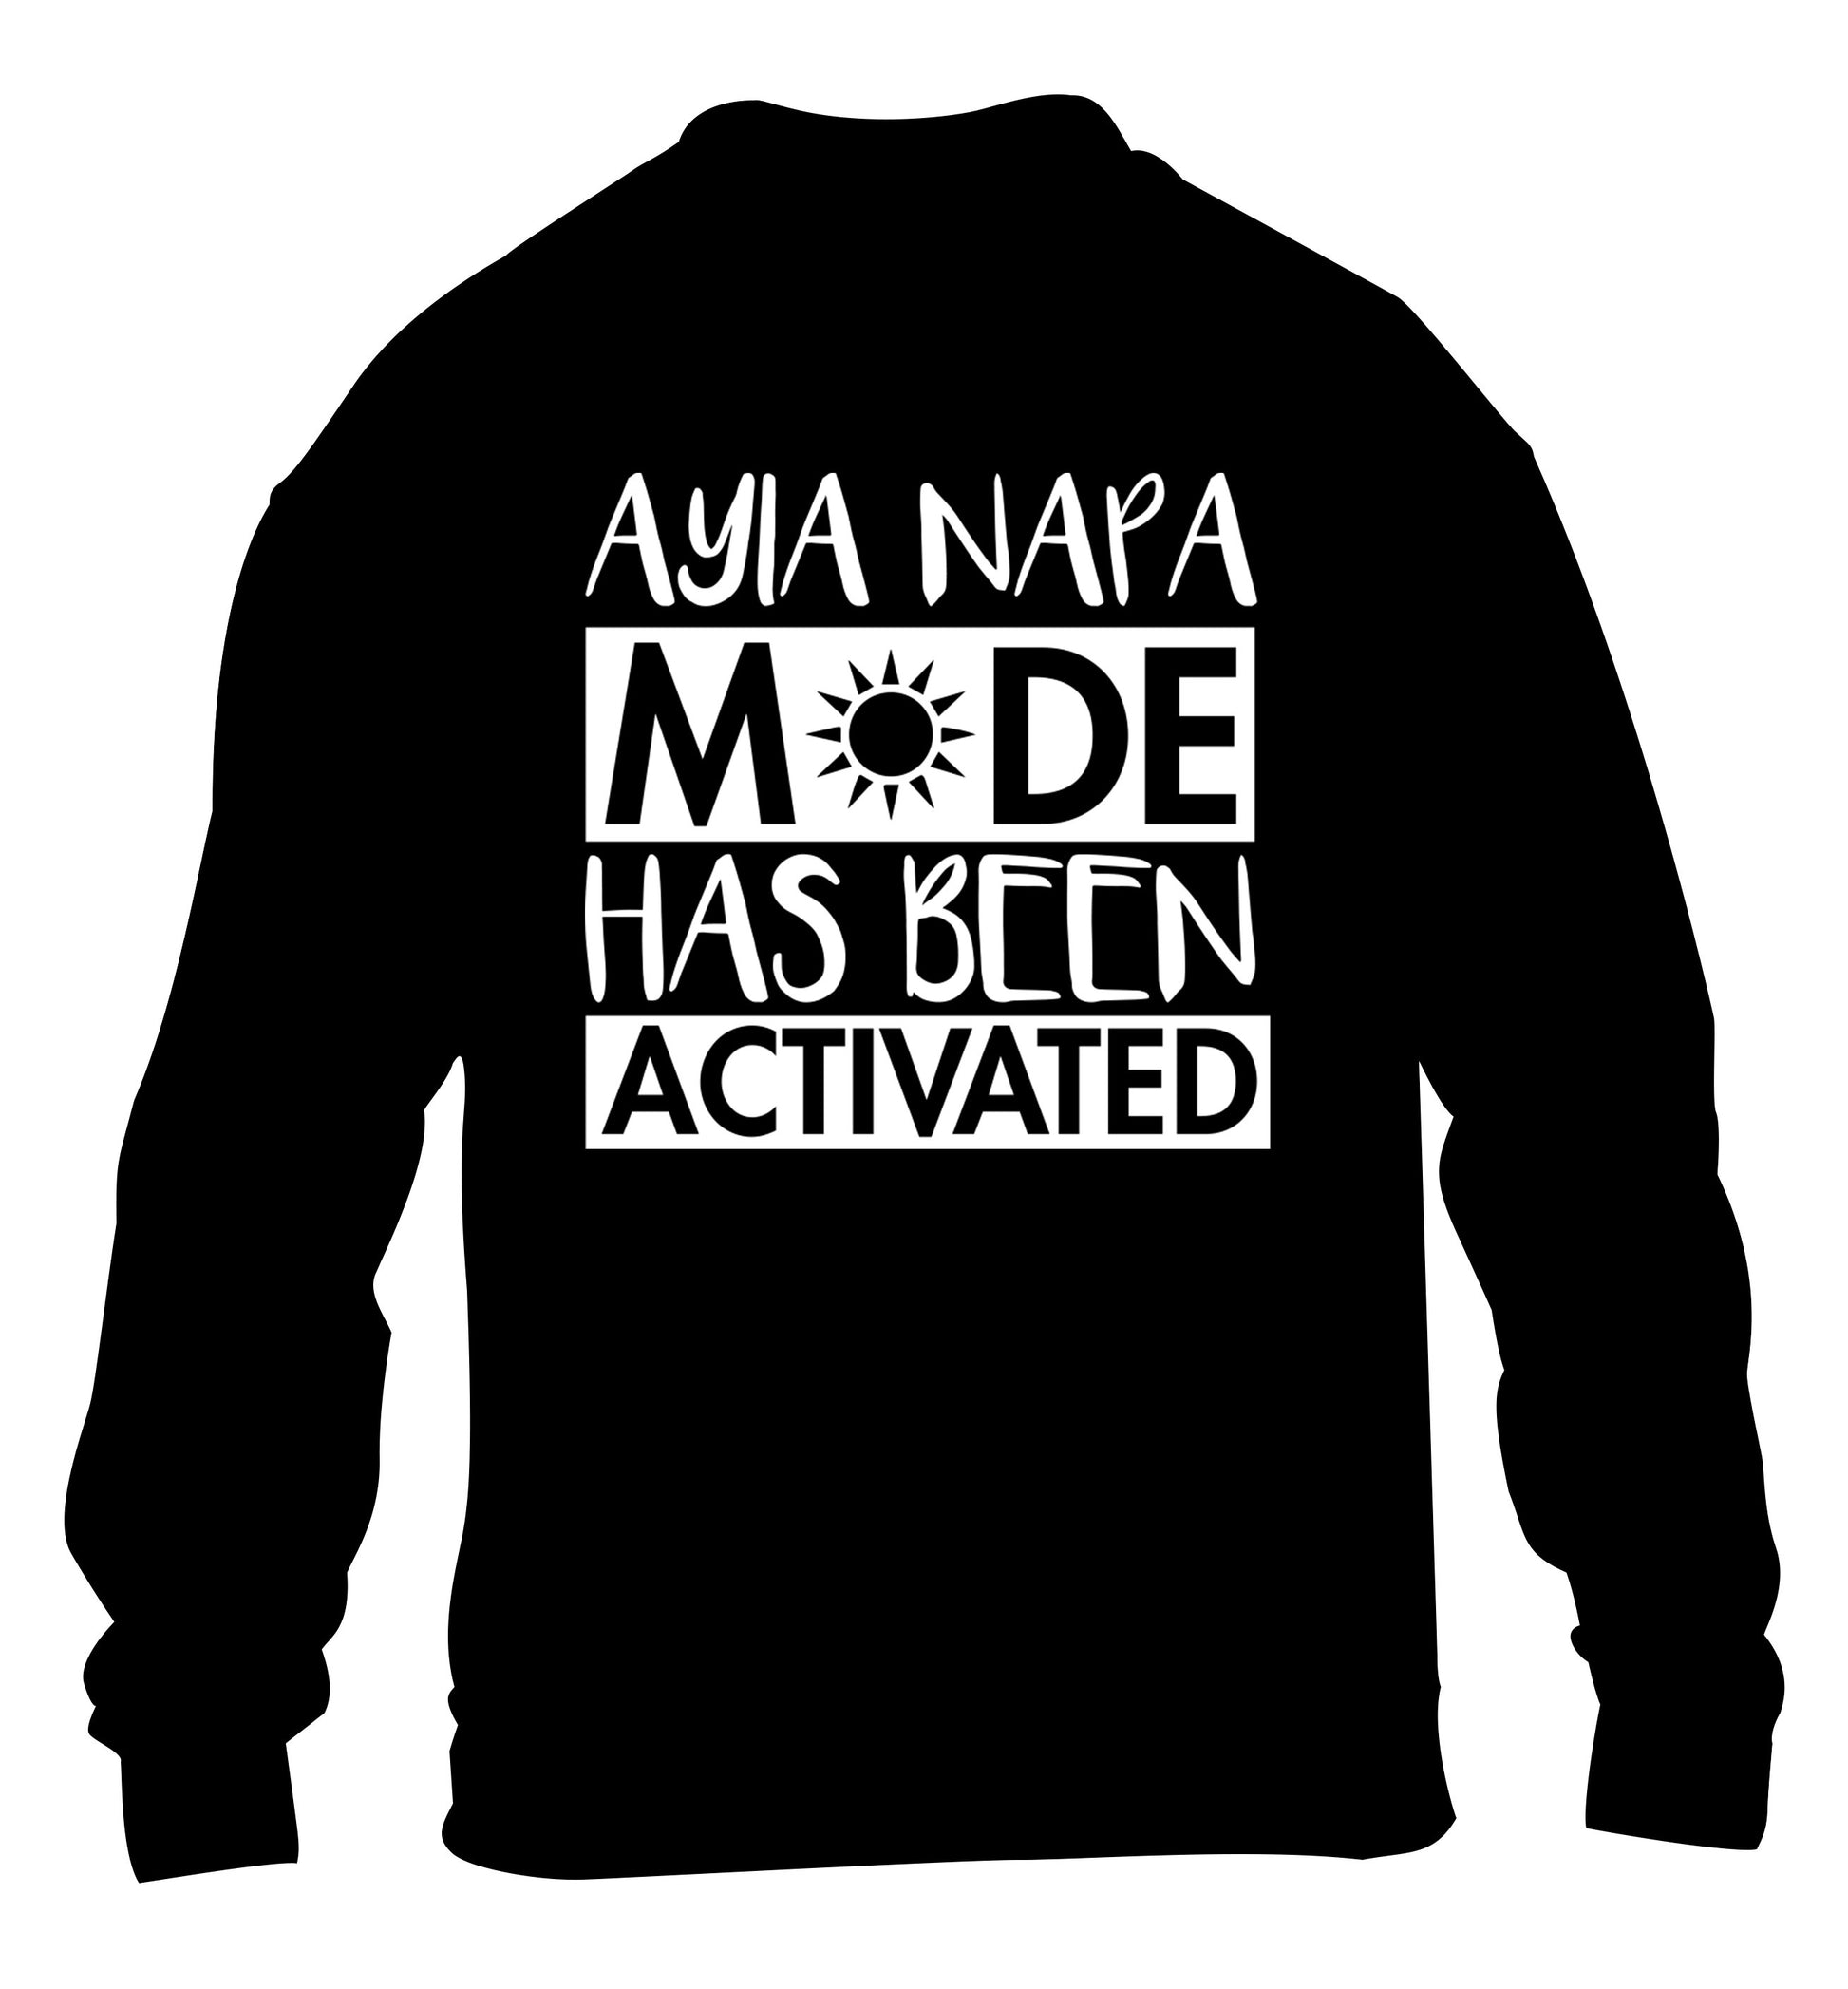 Aiya Napa mode has been activated children's black sweater 12-14 Years